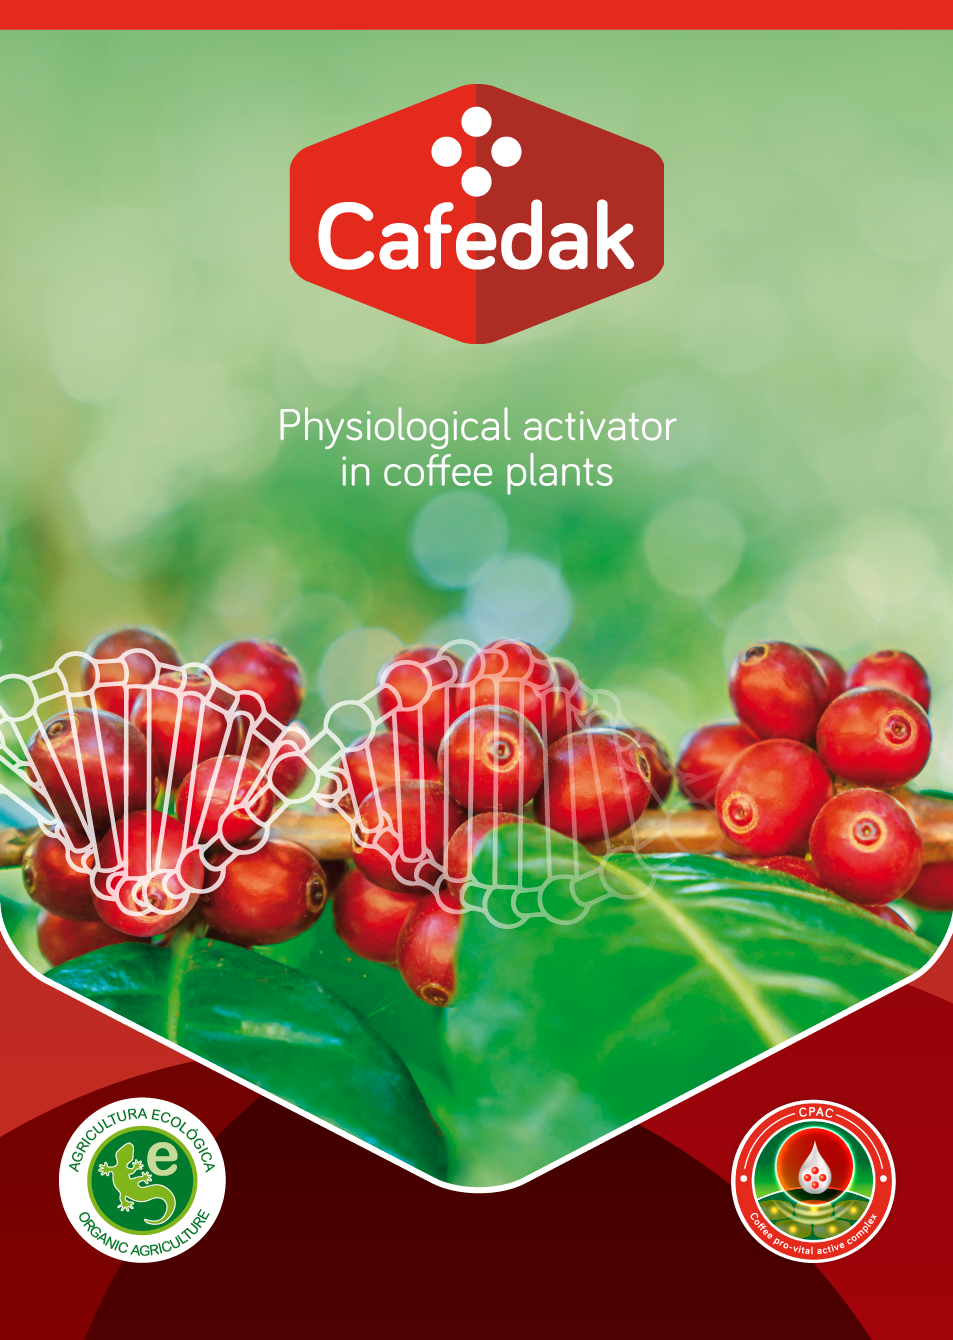 Cafedak: Physiological activator in coffee plants